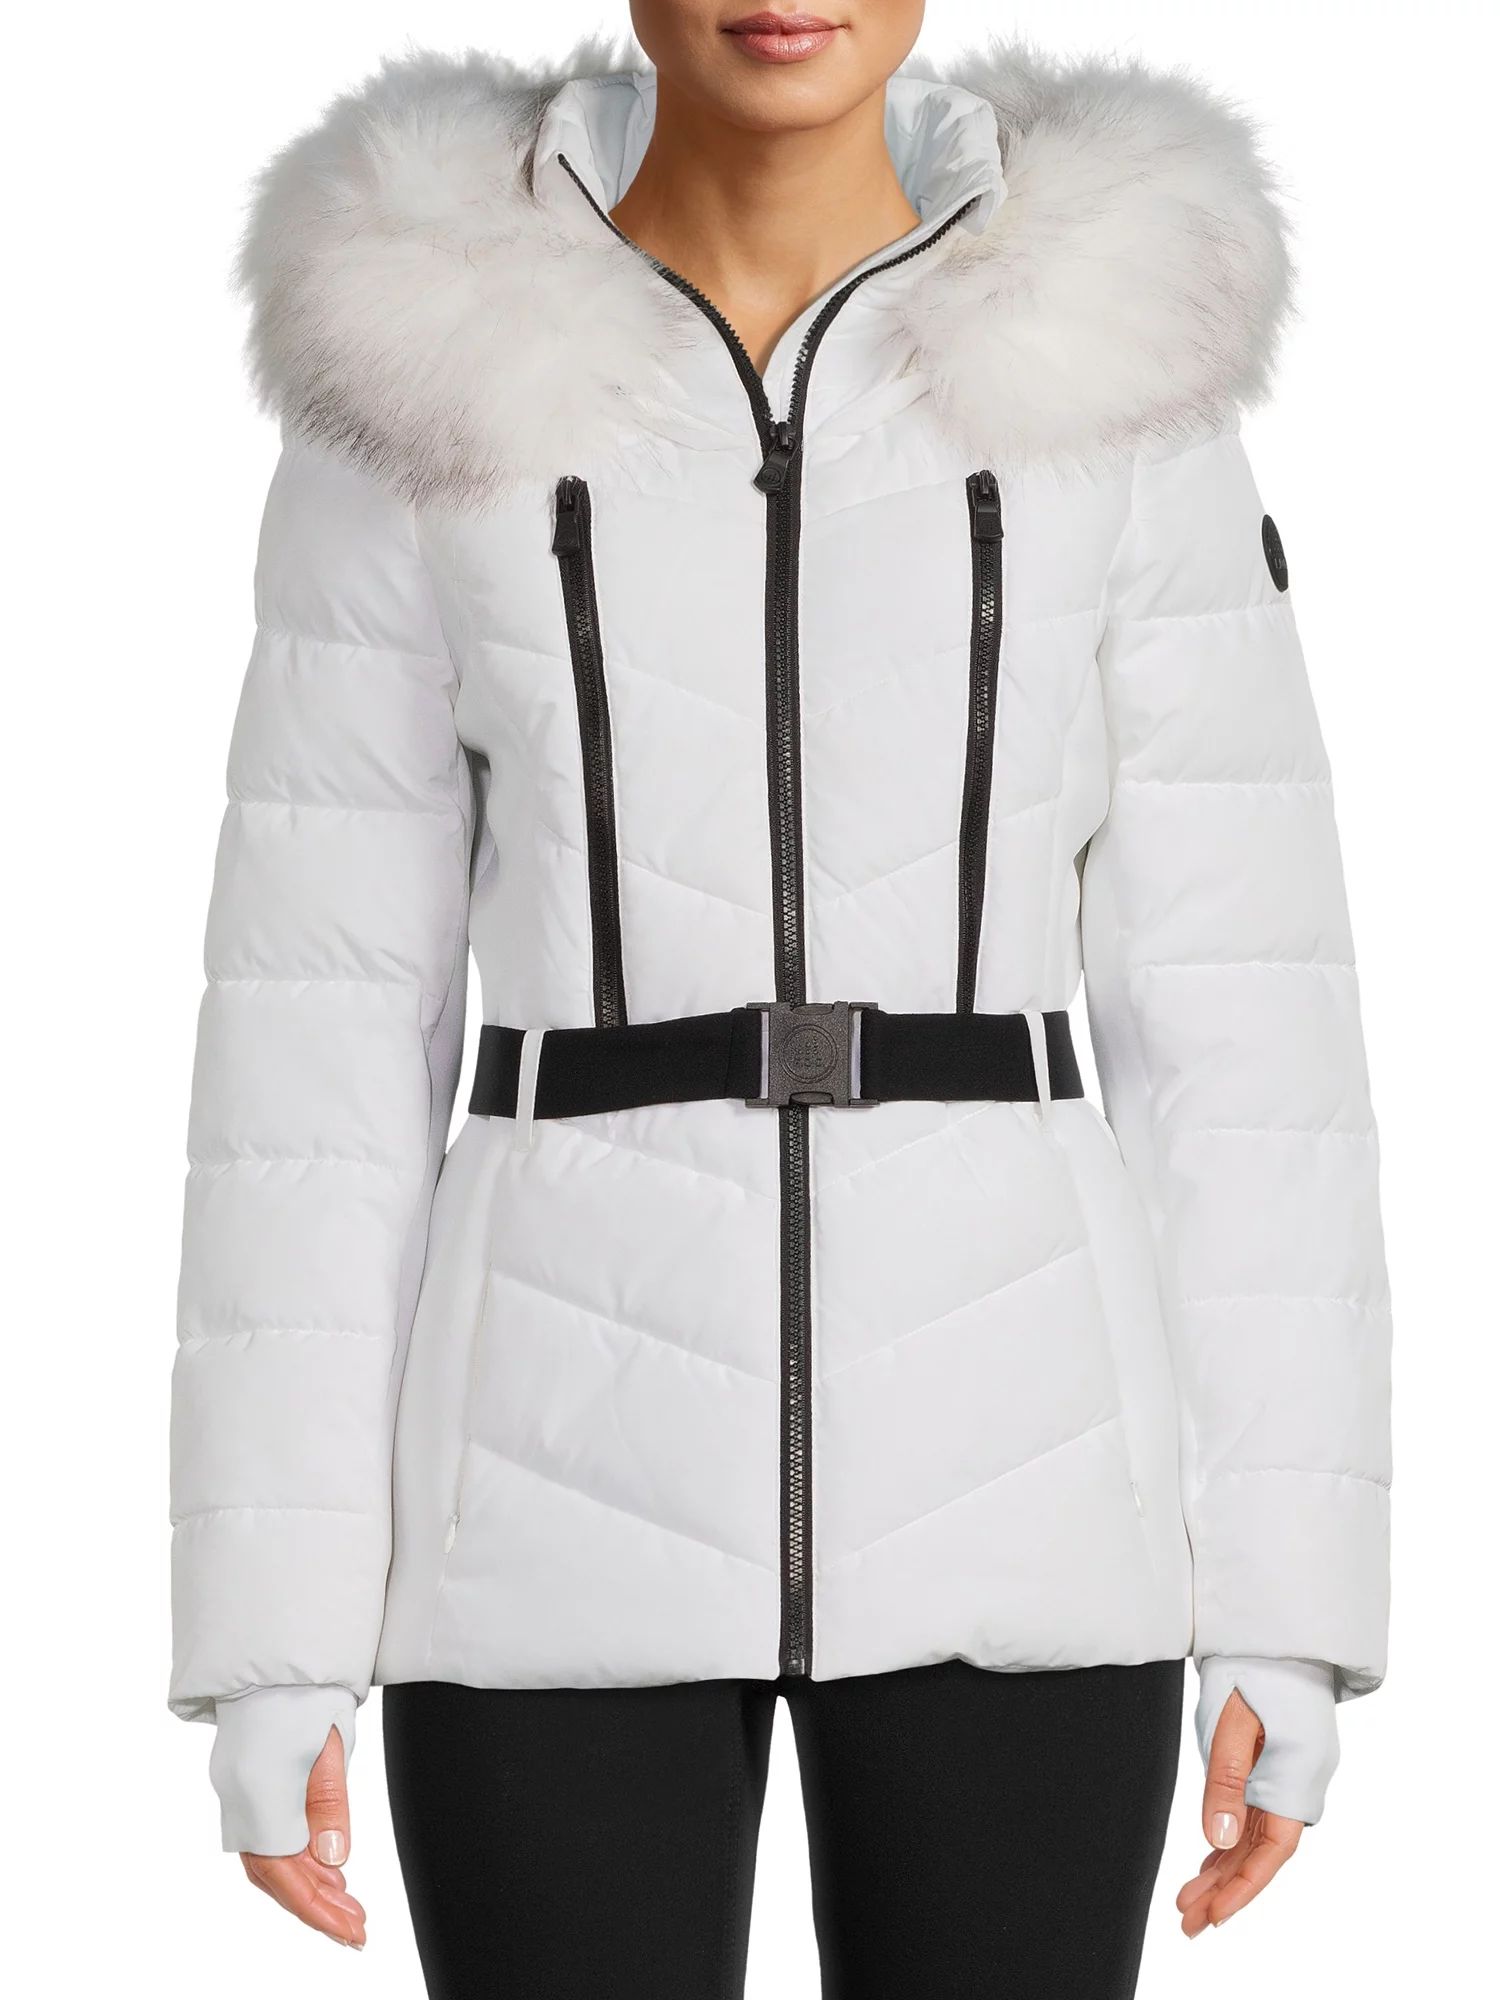 F.O.G. Women's Belted Puffer Coat with Faux Fur Hood, Sizes XS-3X | Walmart (US)